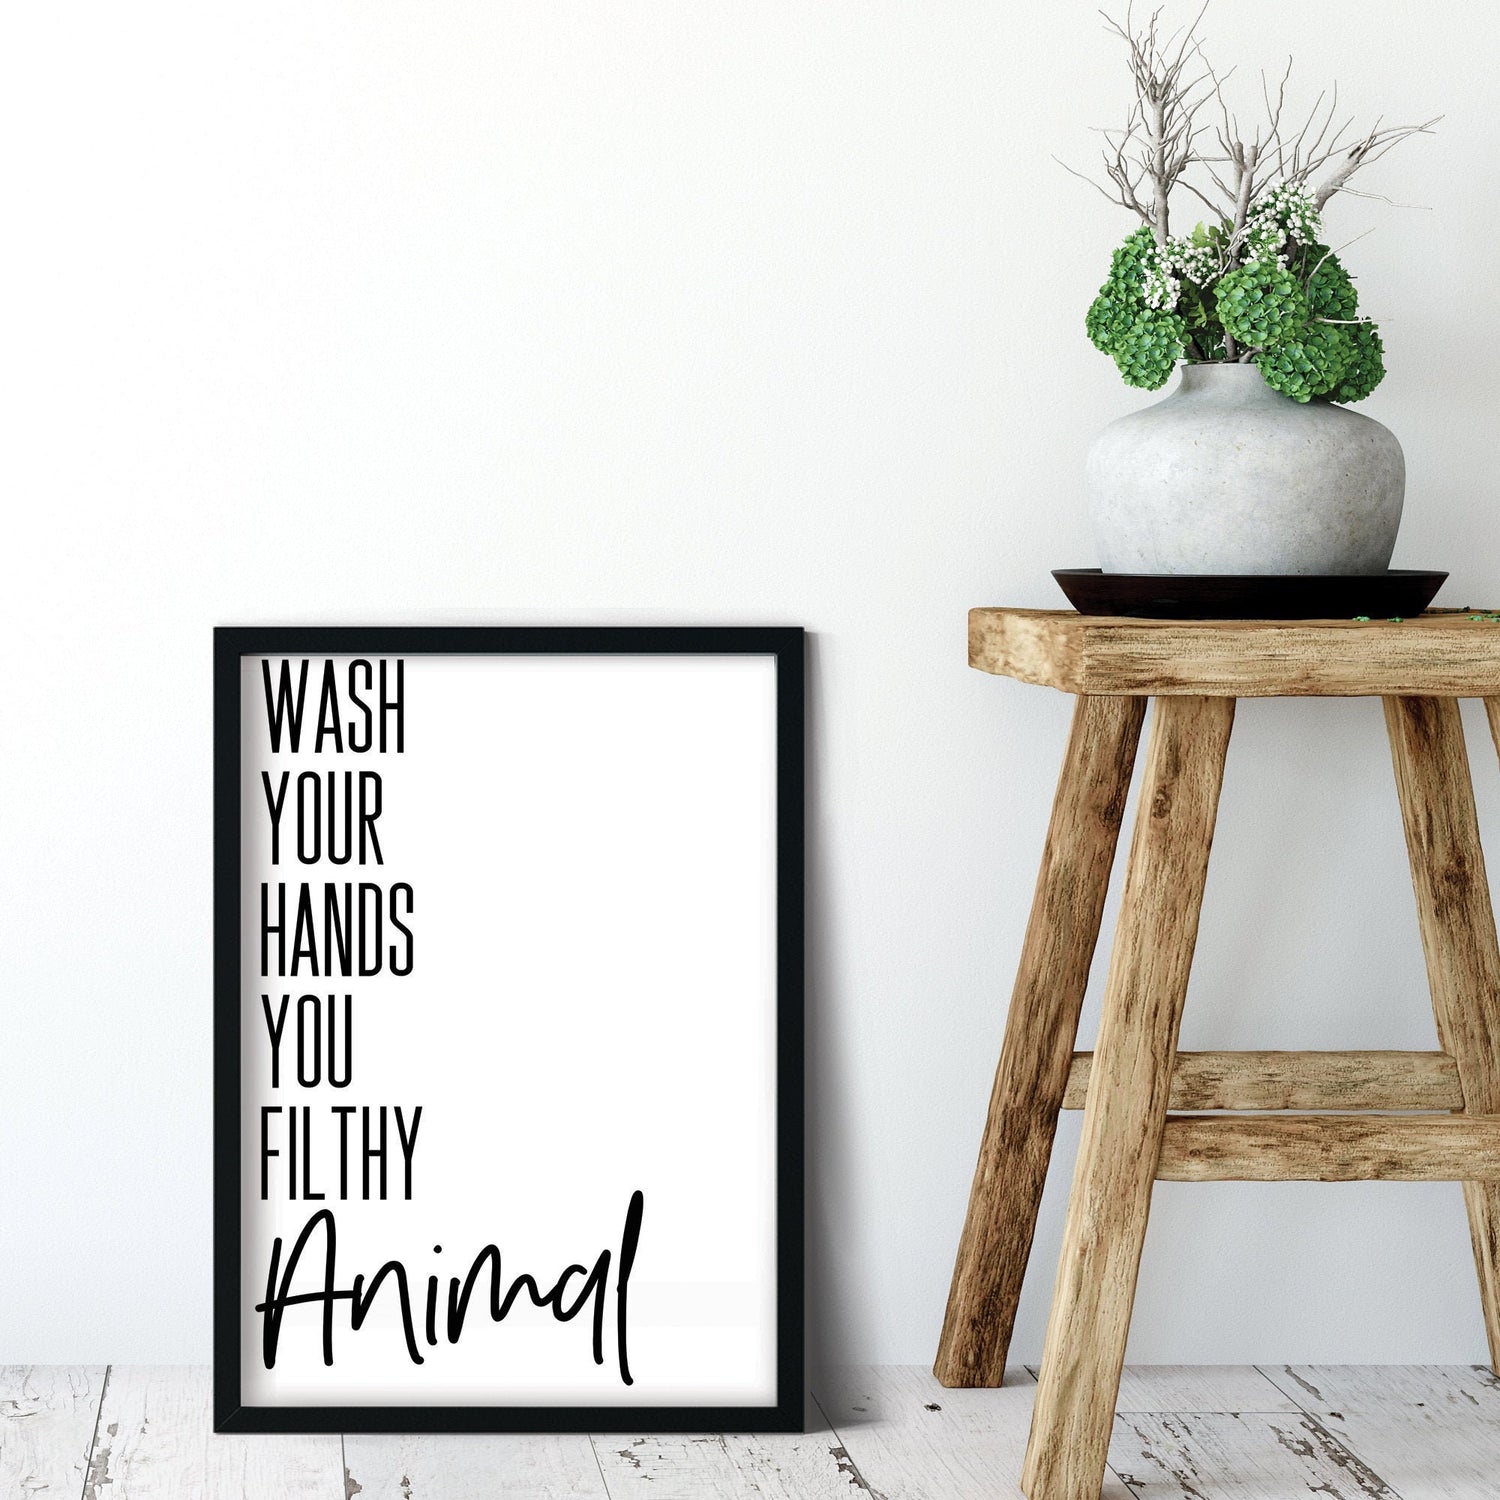 Wash Your Hands You Filthy Animal Bathroom Print